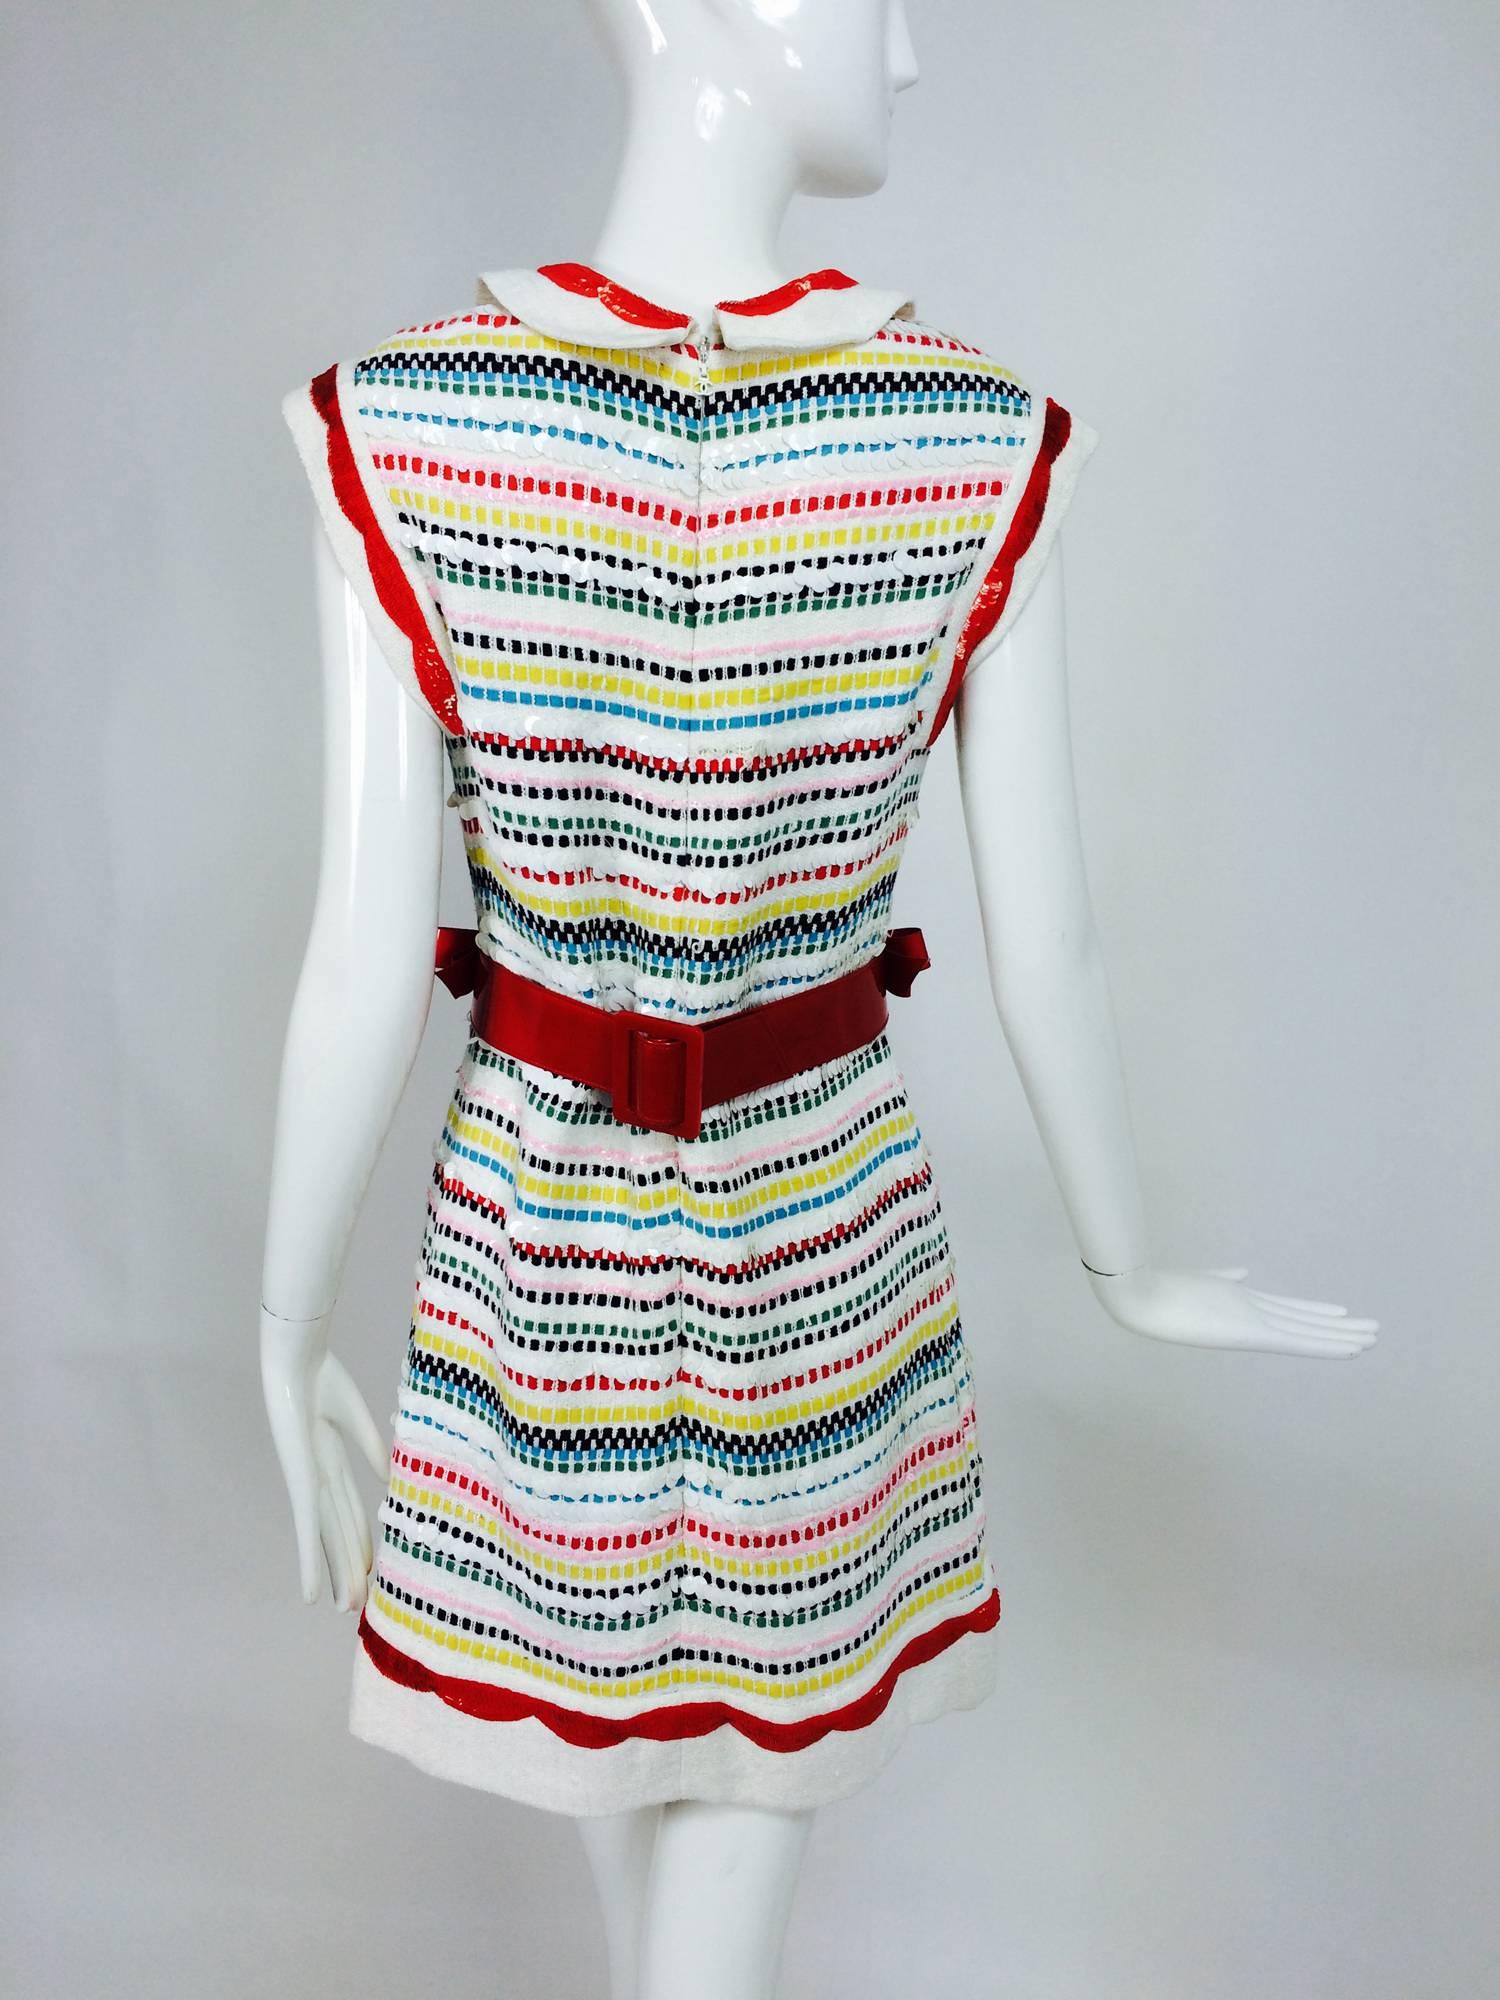 Chanel sleeveless white knit sequin dress & red patent bow belt 2008 4